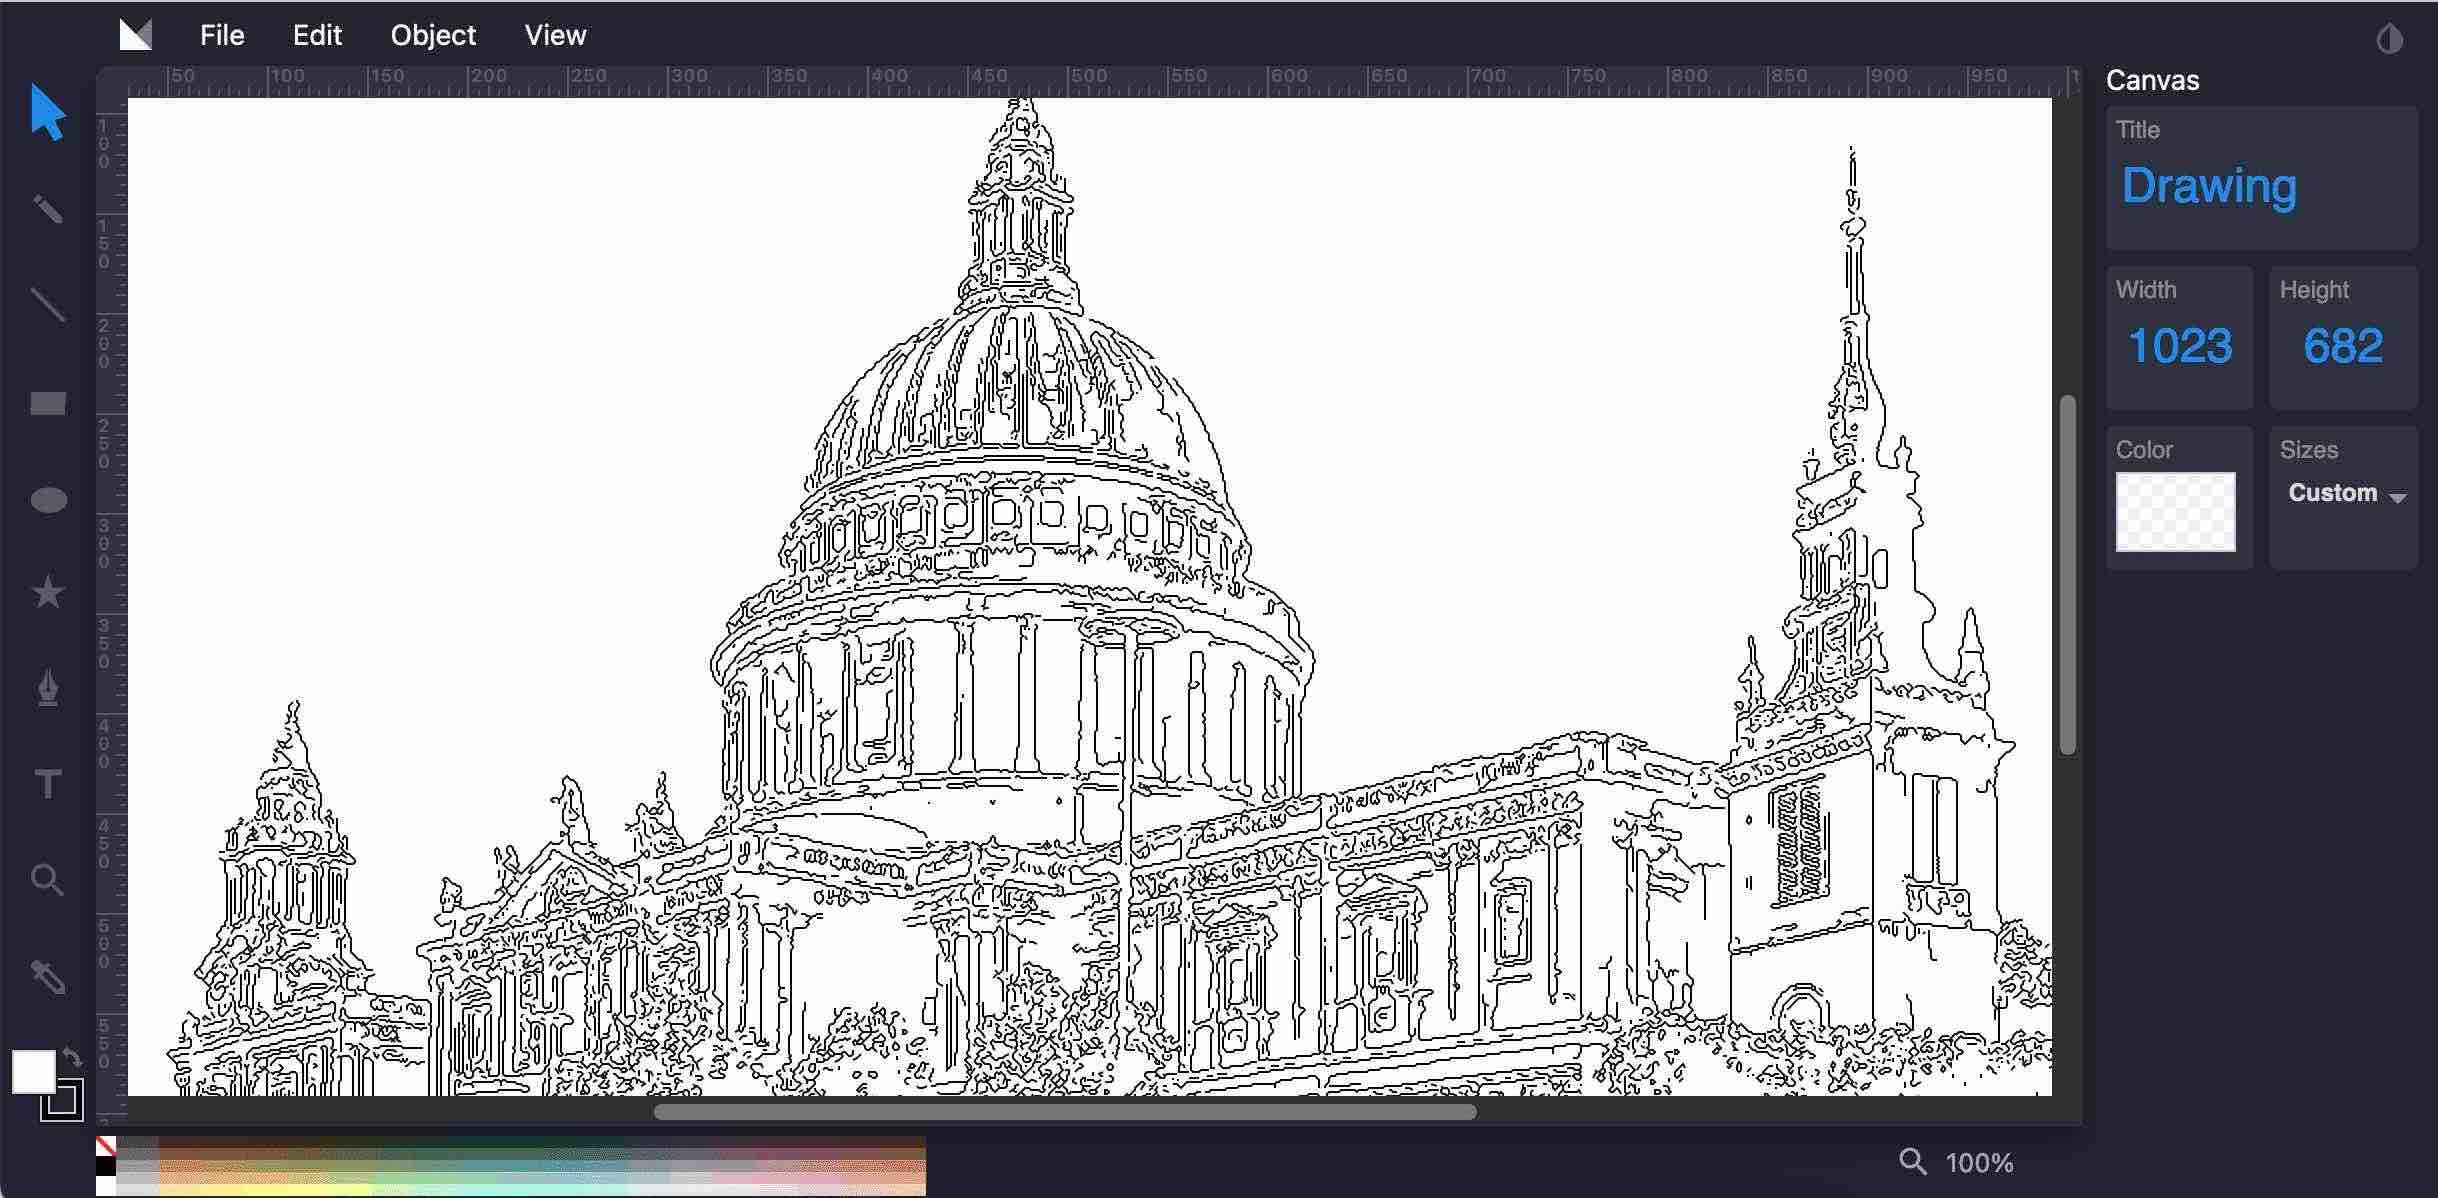 6 Apps To Turn Photos into Drawings for Free